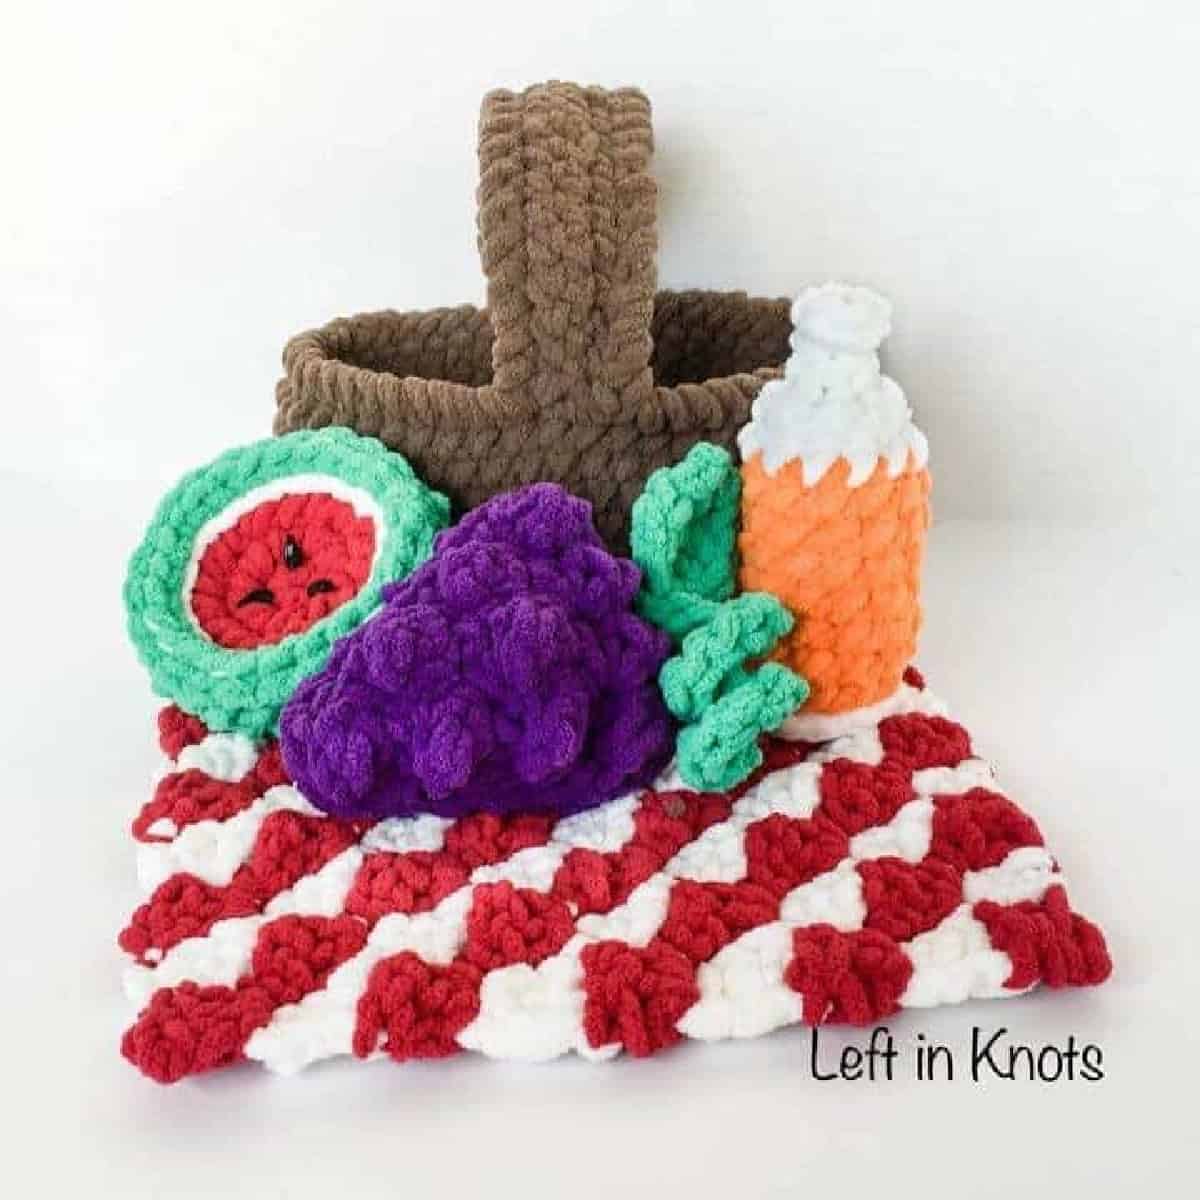 Beat the Heat with This Free Crochet Water Bottle Holder Pattern